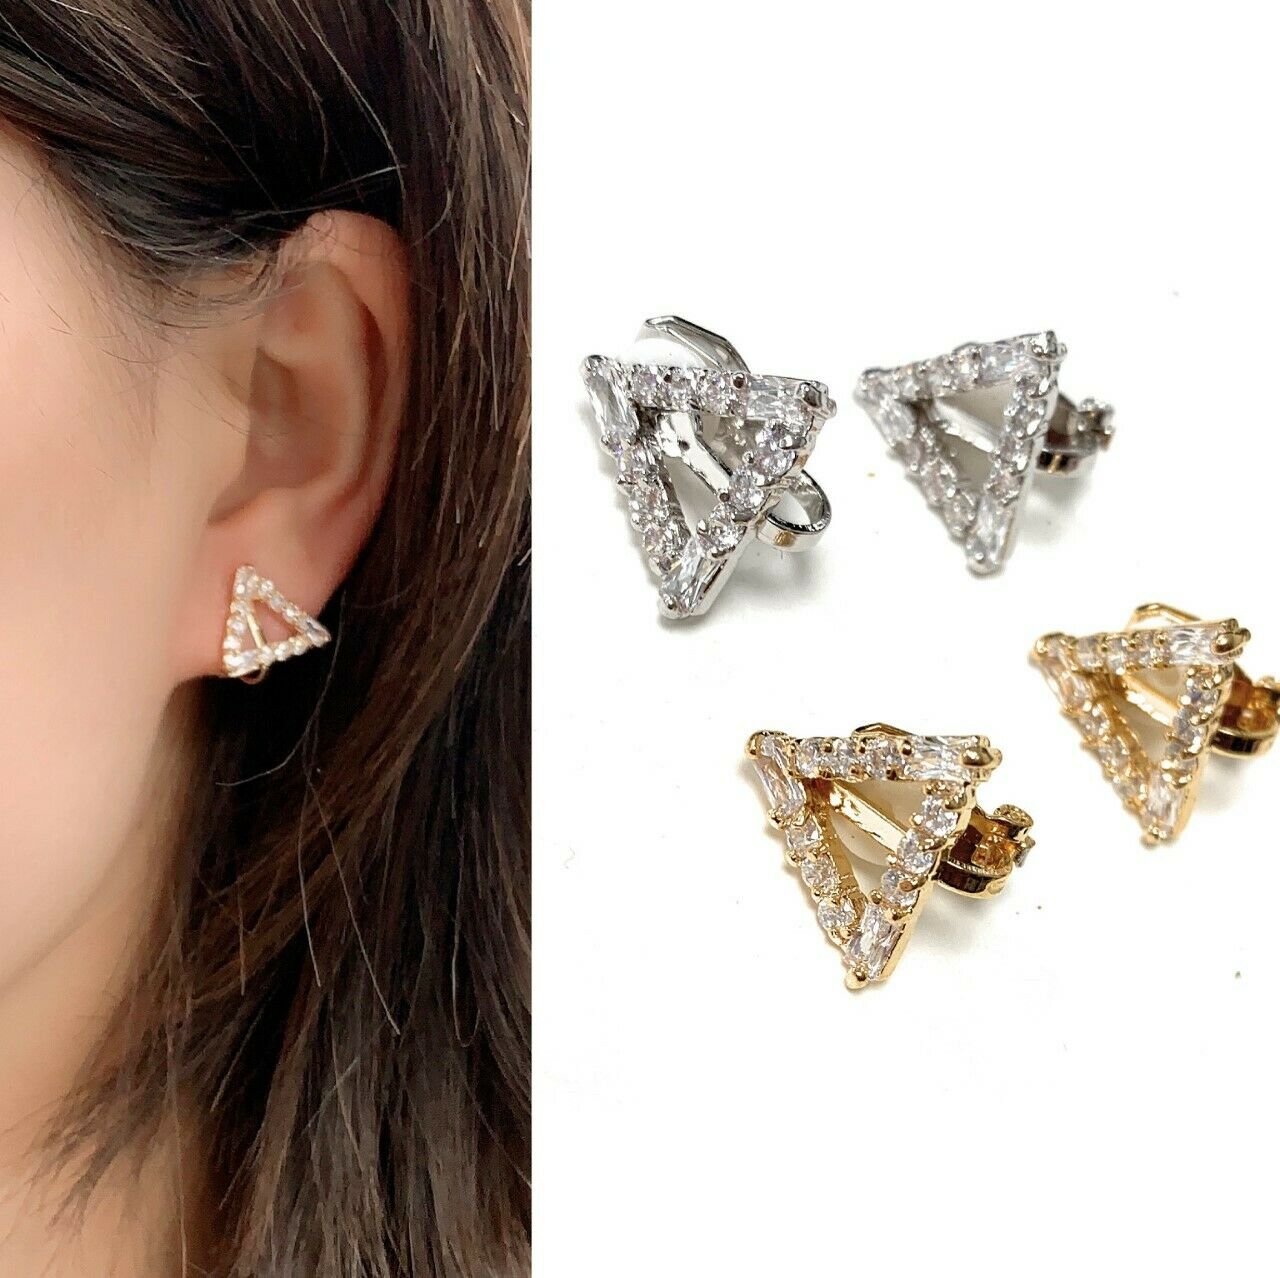 Girls Women's High Quality Sparkly Zircon Crystal Clip On Earrings Studs Gift UK